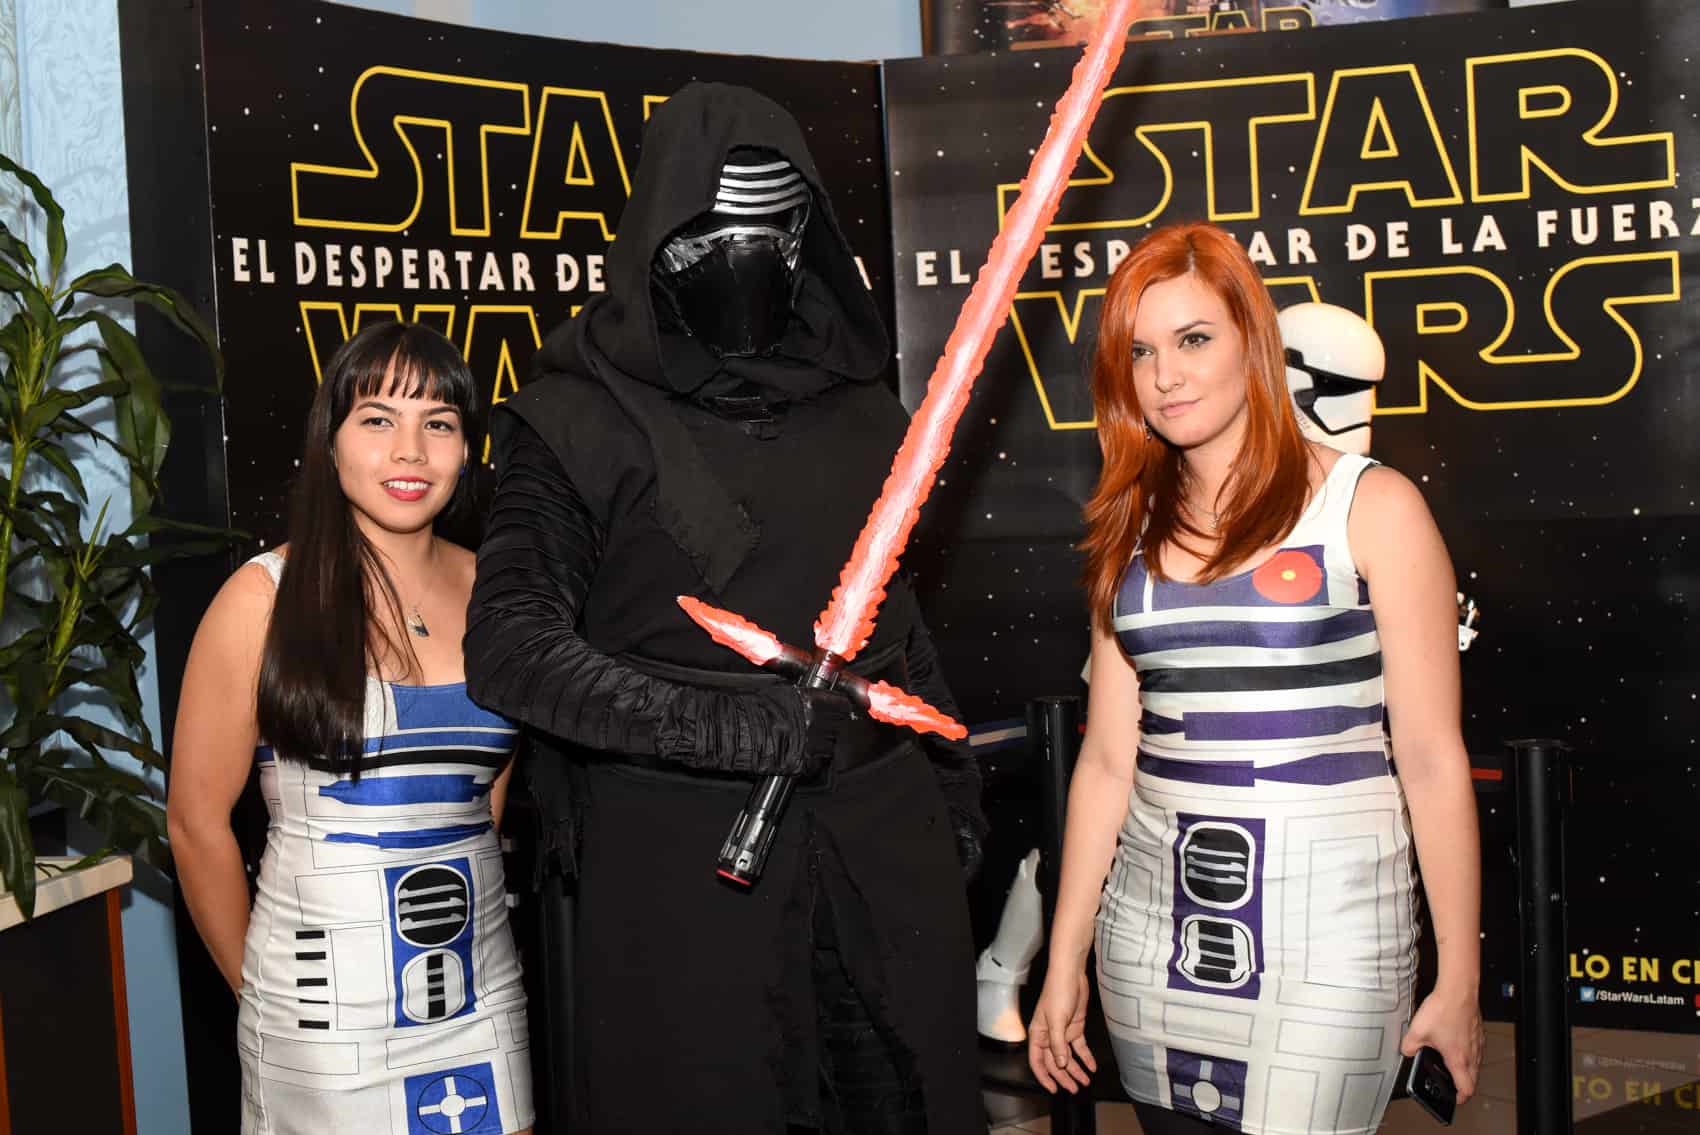 Fans pose with Kylo Ren